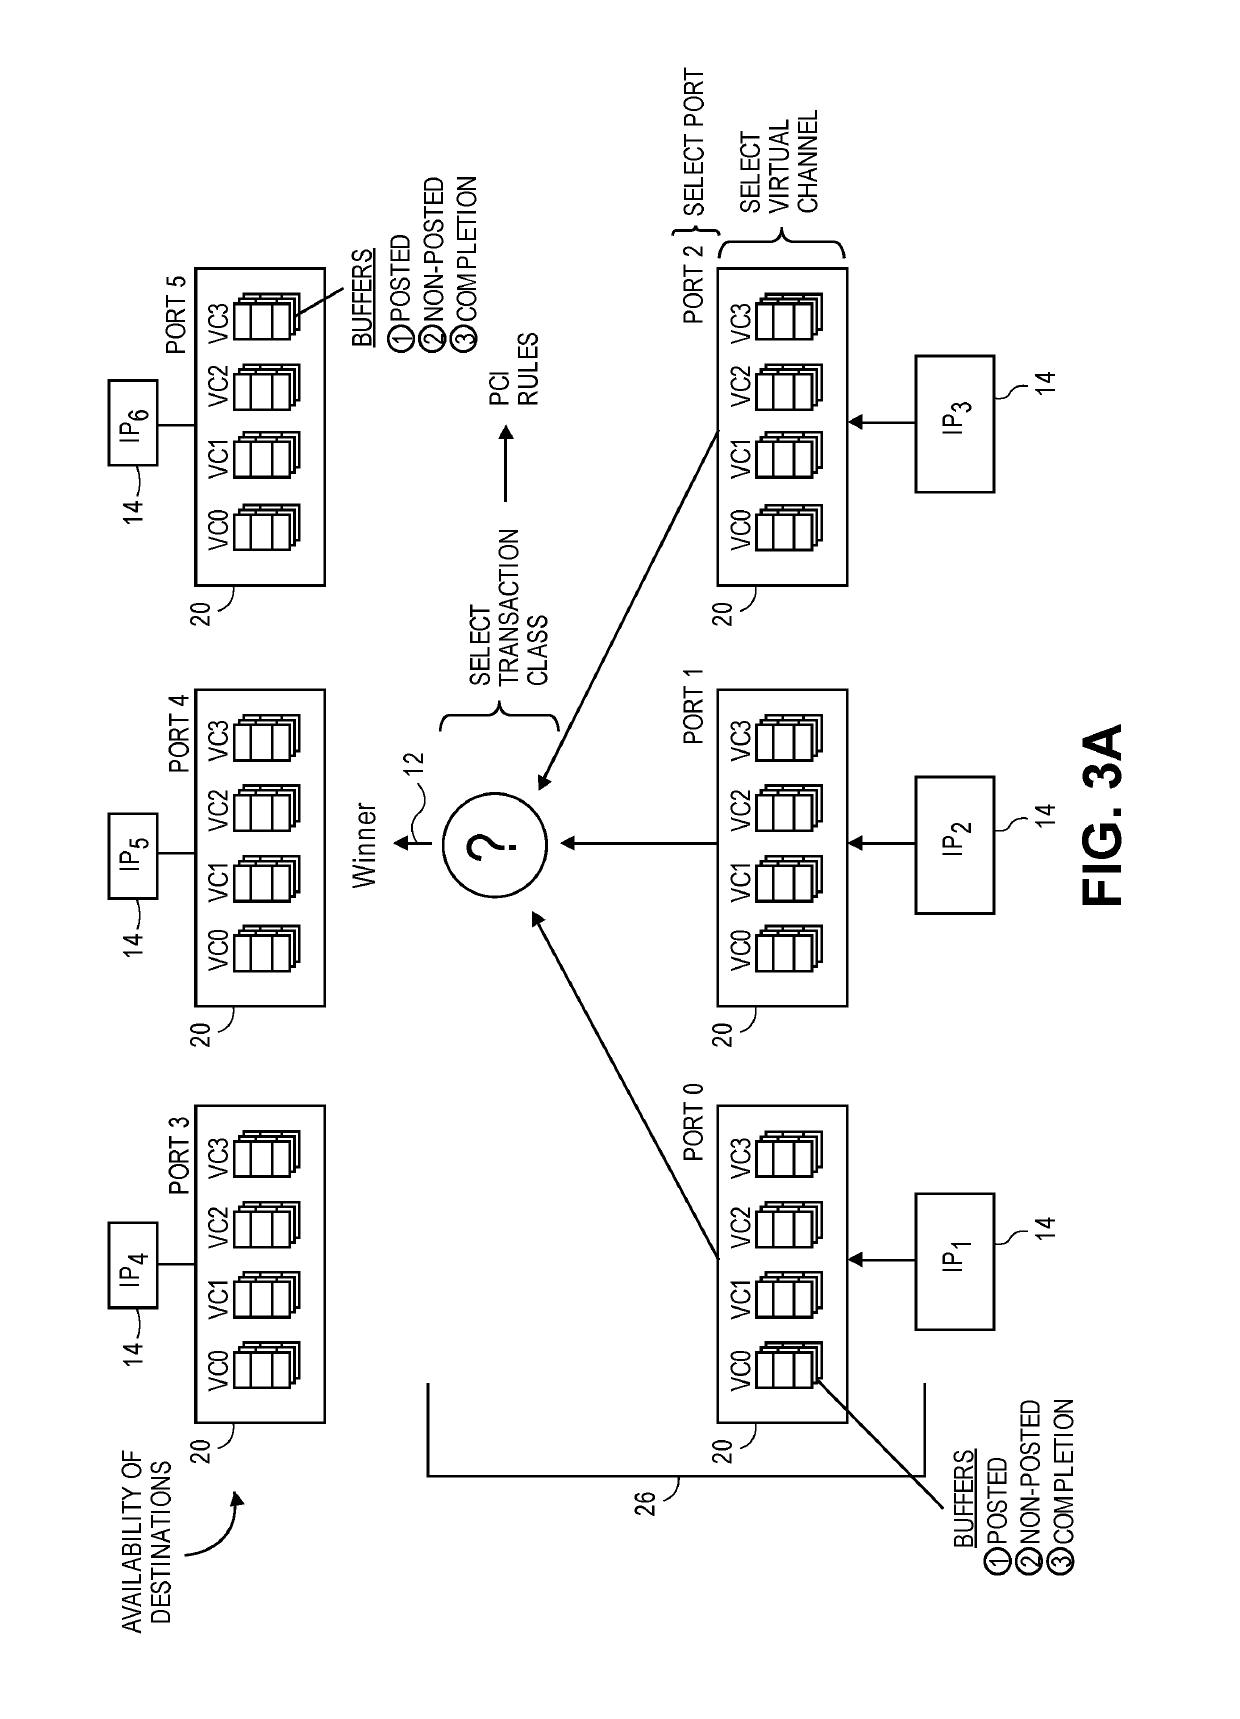 Protocol level control for system on a chip (SOC) agent reset and power management